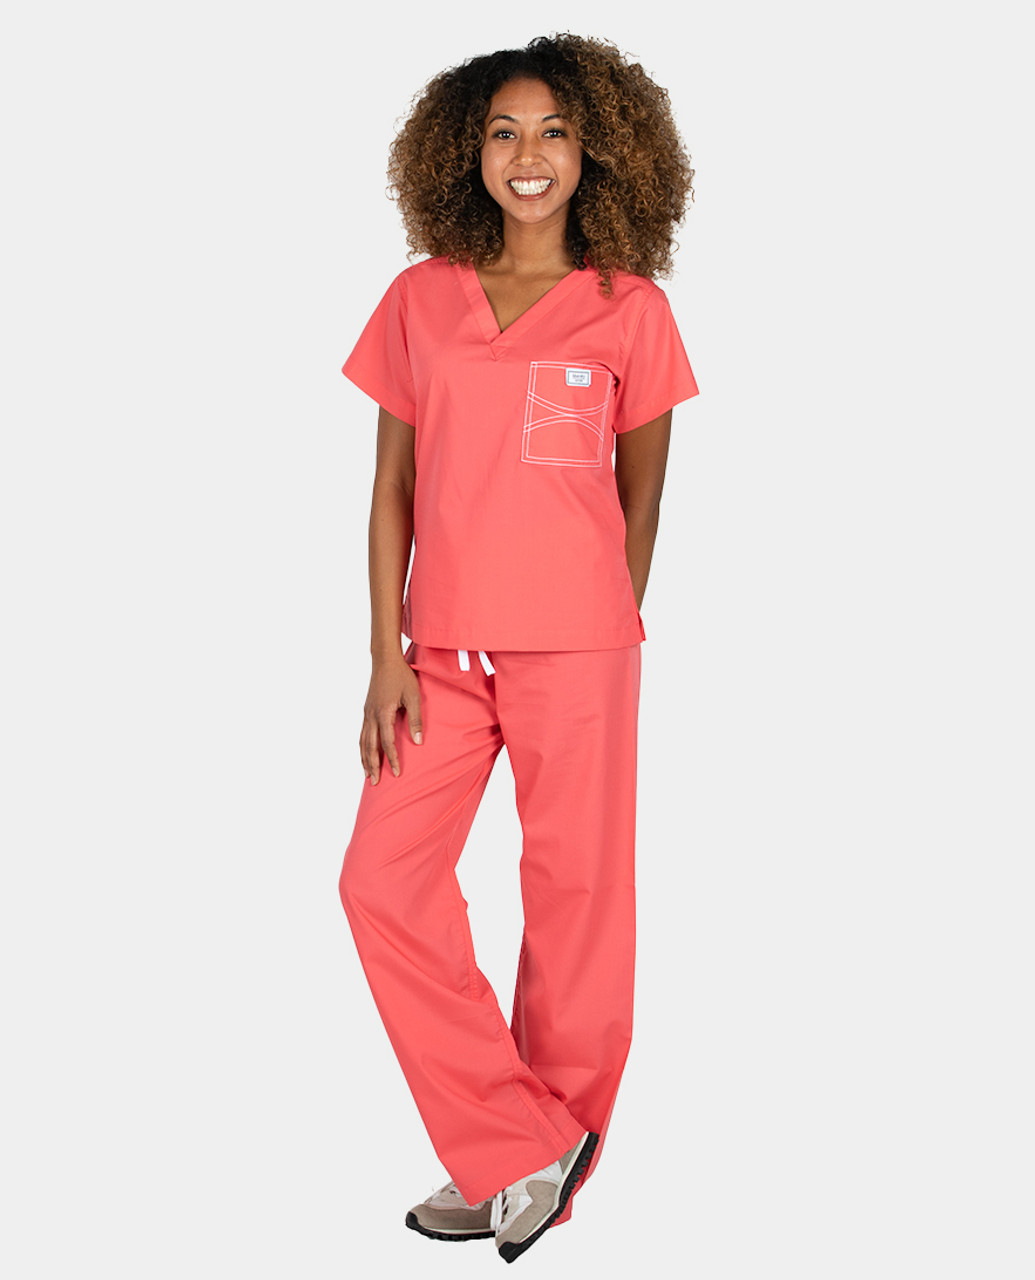 The Best Clothes to Wear Underneath Your Medical Scrubs - Blue Sky Scrubs